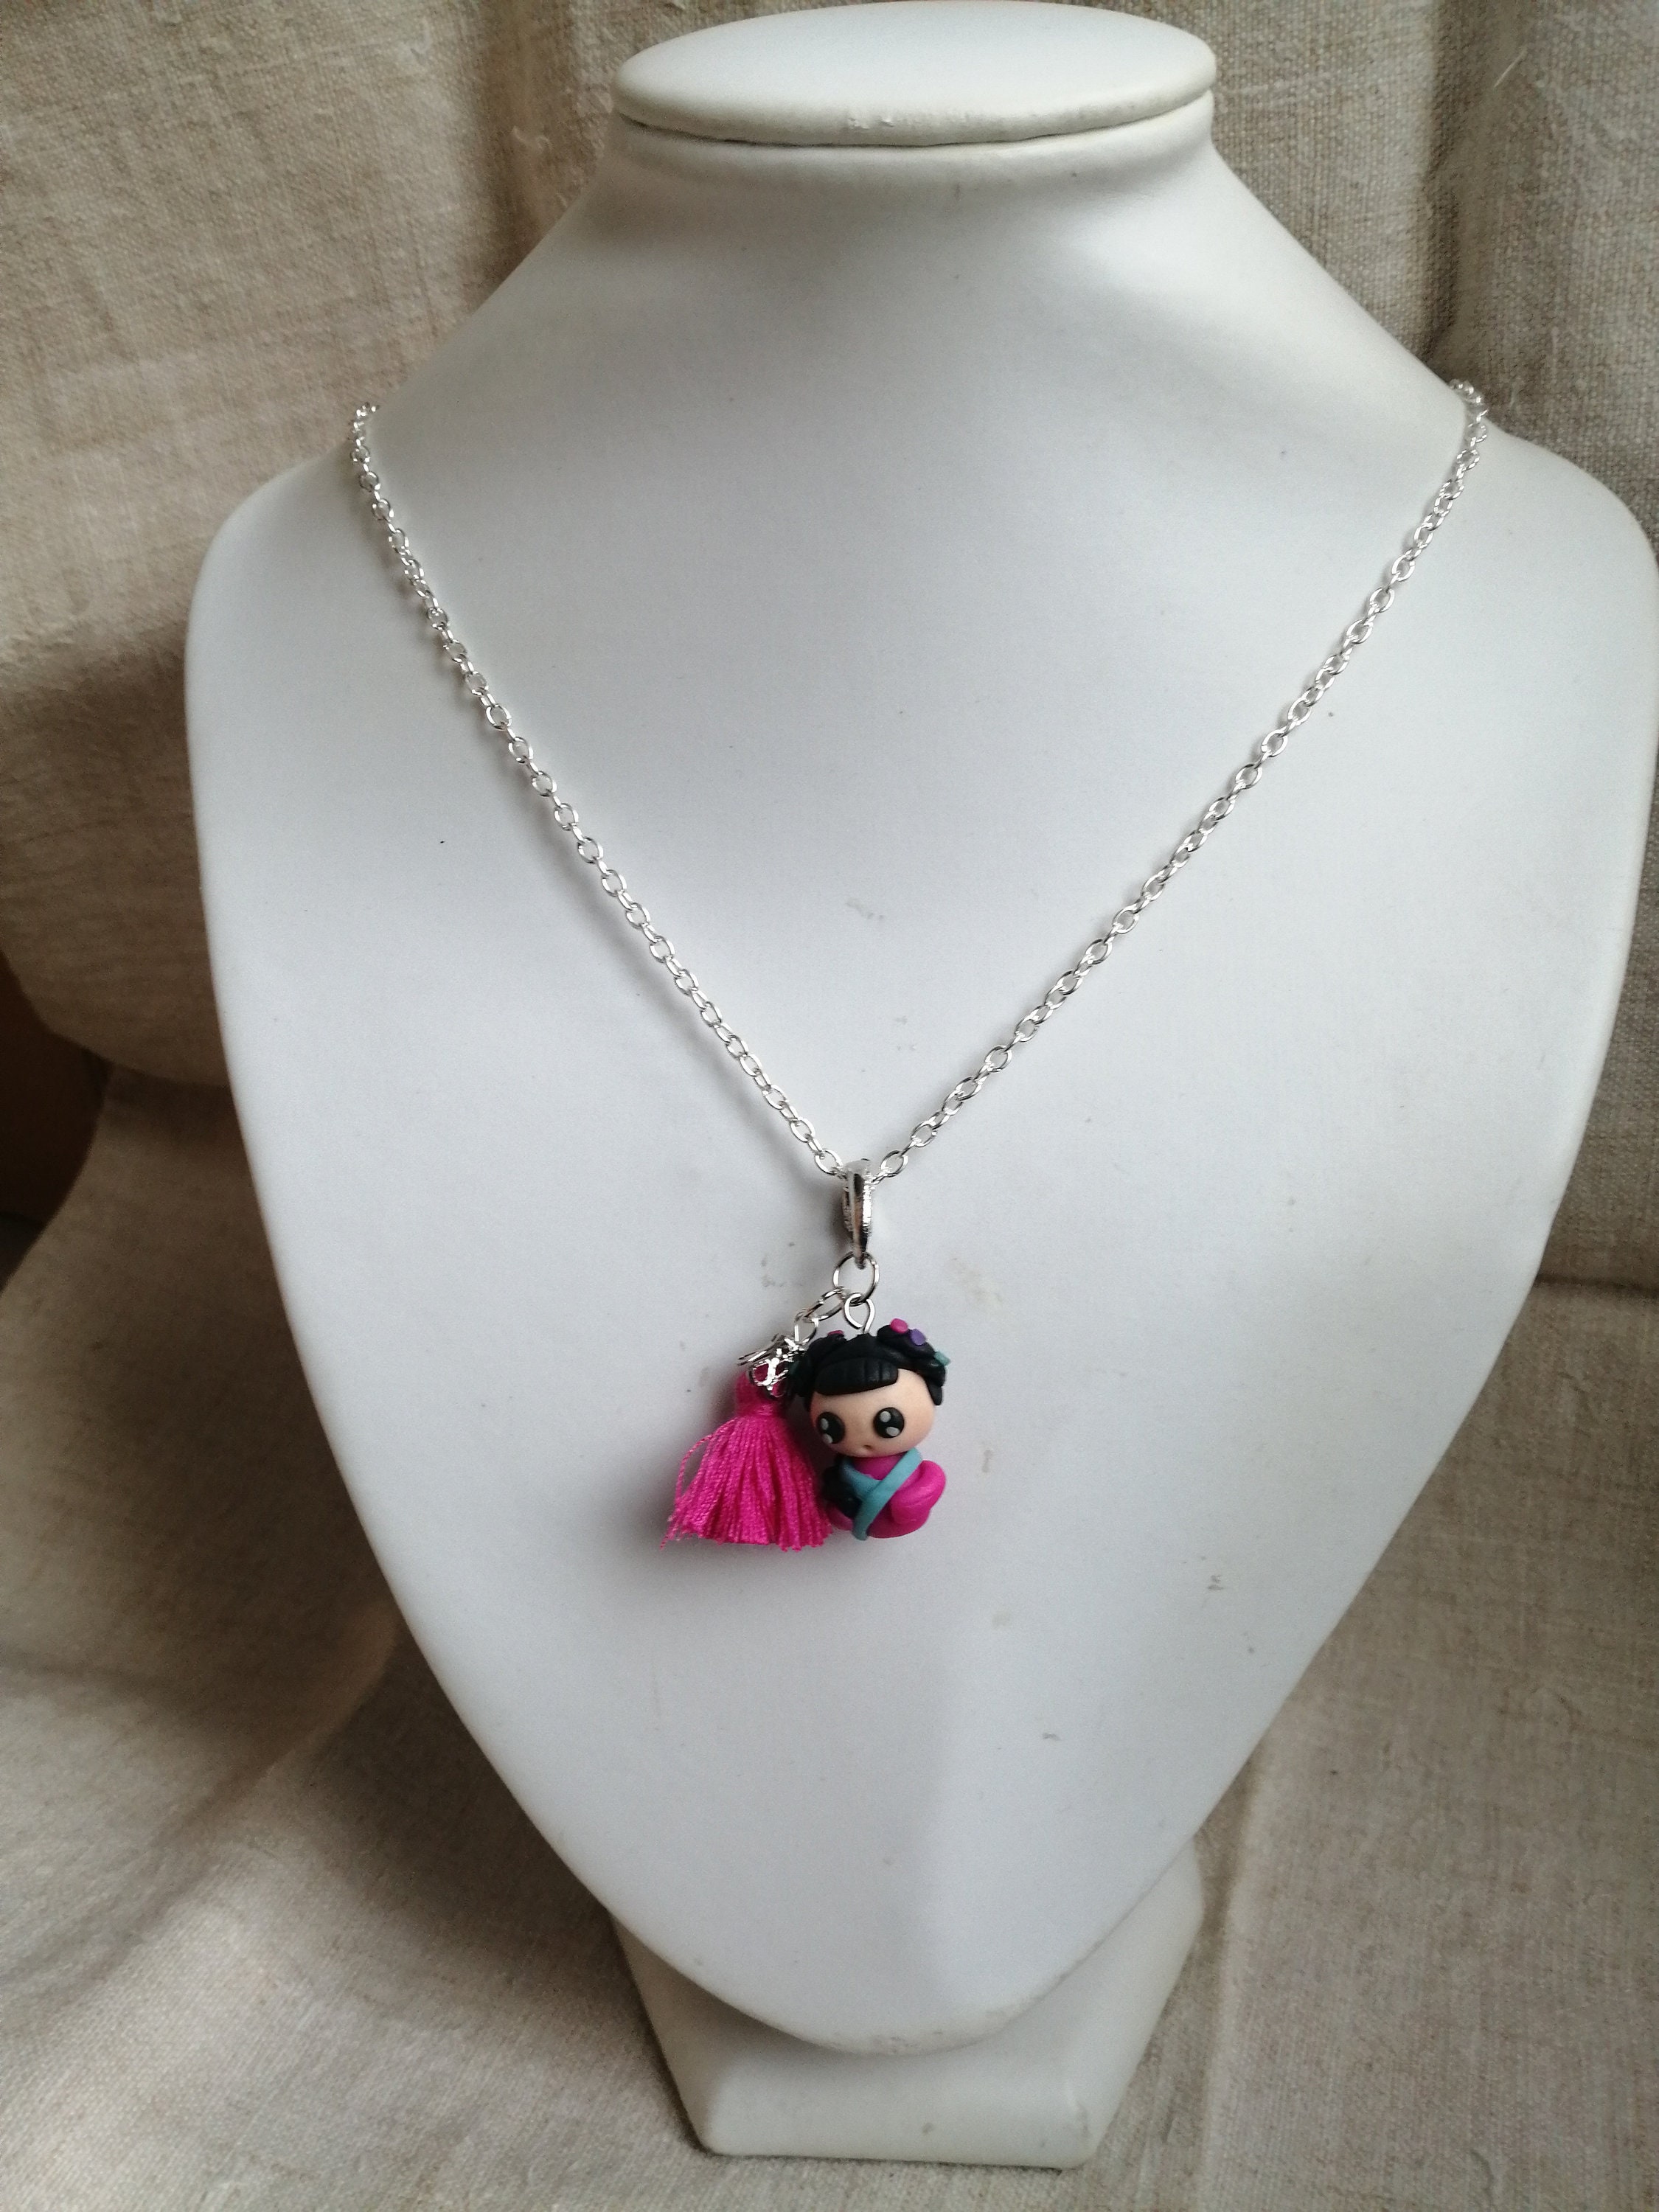 Kids' jewellery in Hong Kong – necklaces and bracelets little